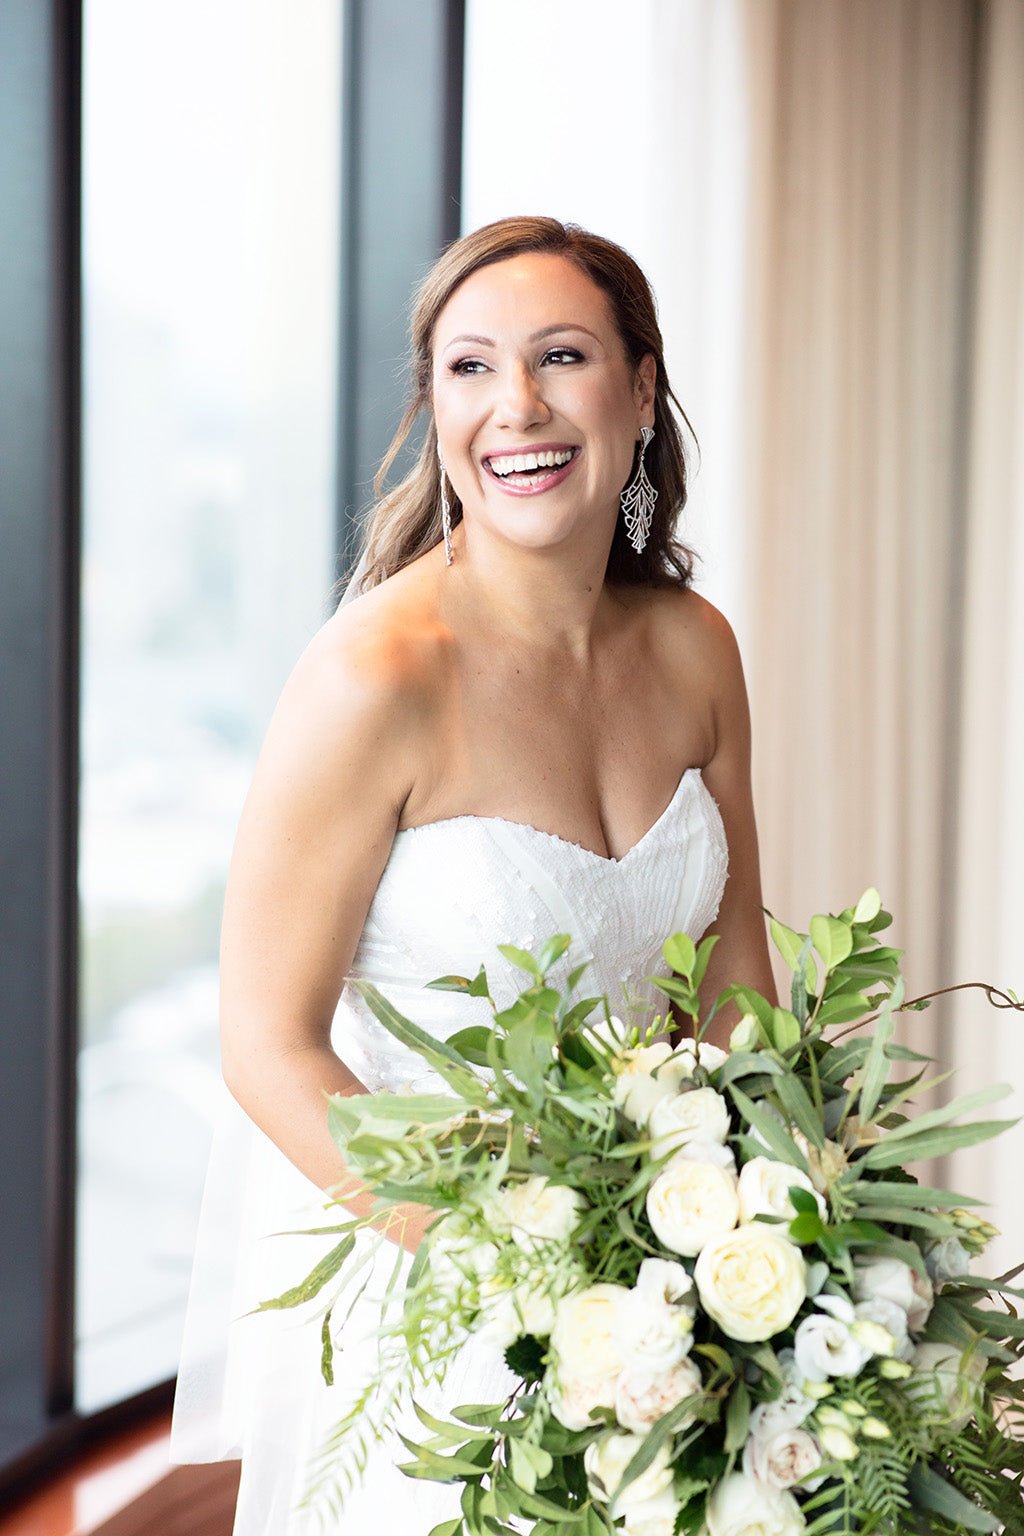 Bride with her wedding bouquet flowers